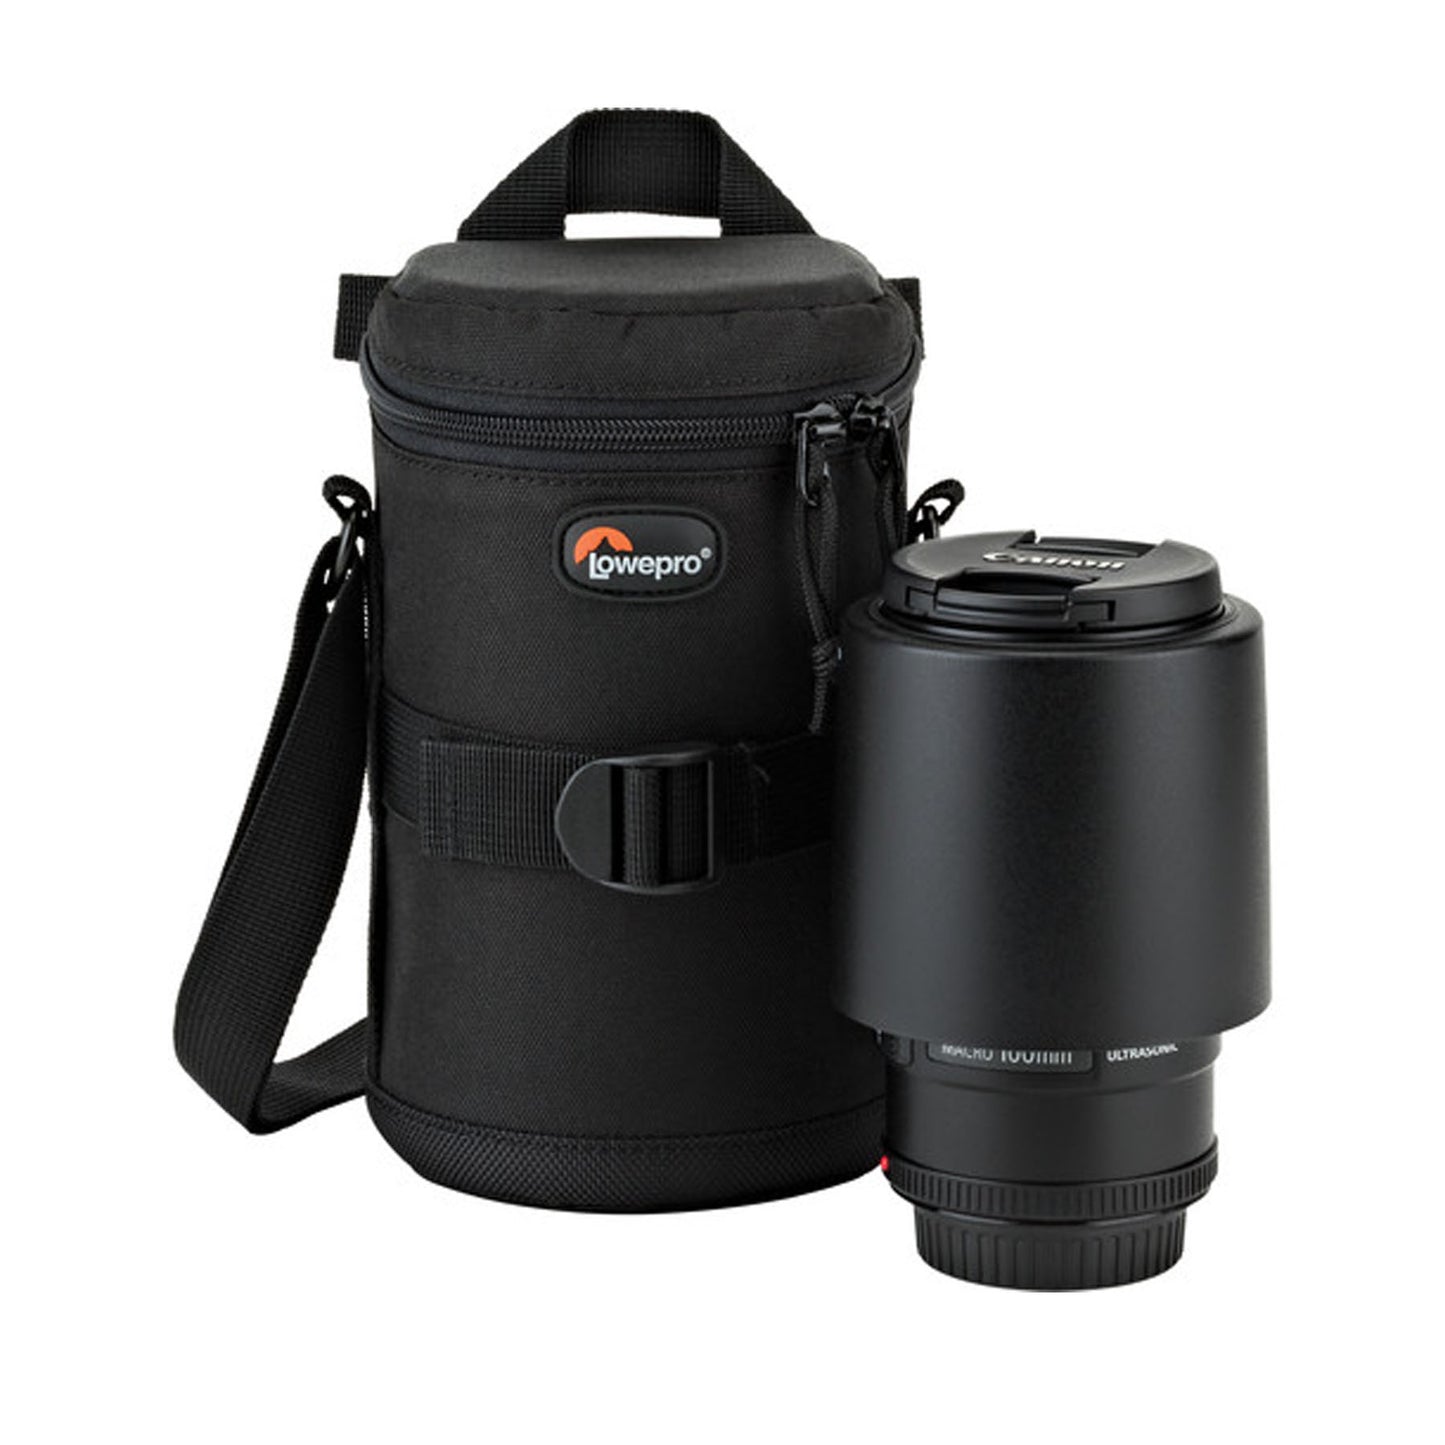 Lowepro Camera Foam Padded Lens Case 9x16cm Sling Bag with Overlap Zipper, SlipLock Attachment and Removable Strap for High-Power Zoom Lens Protection